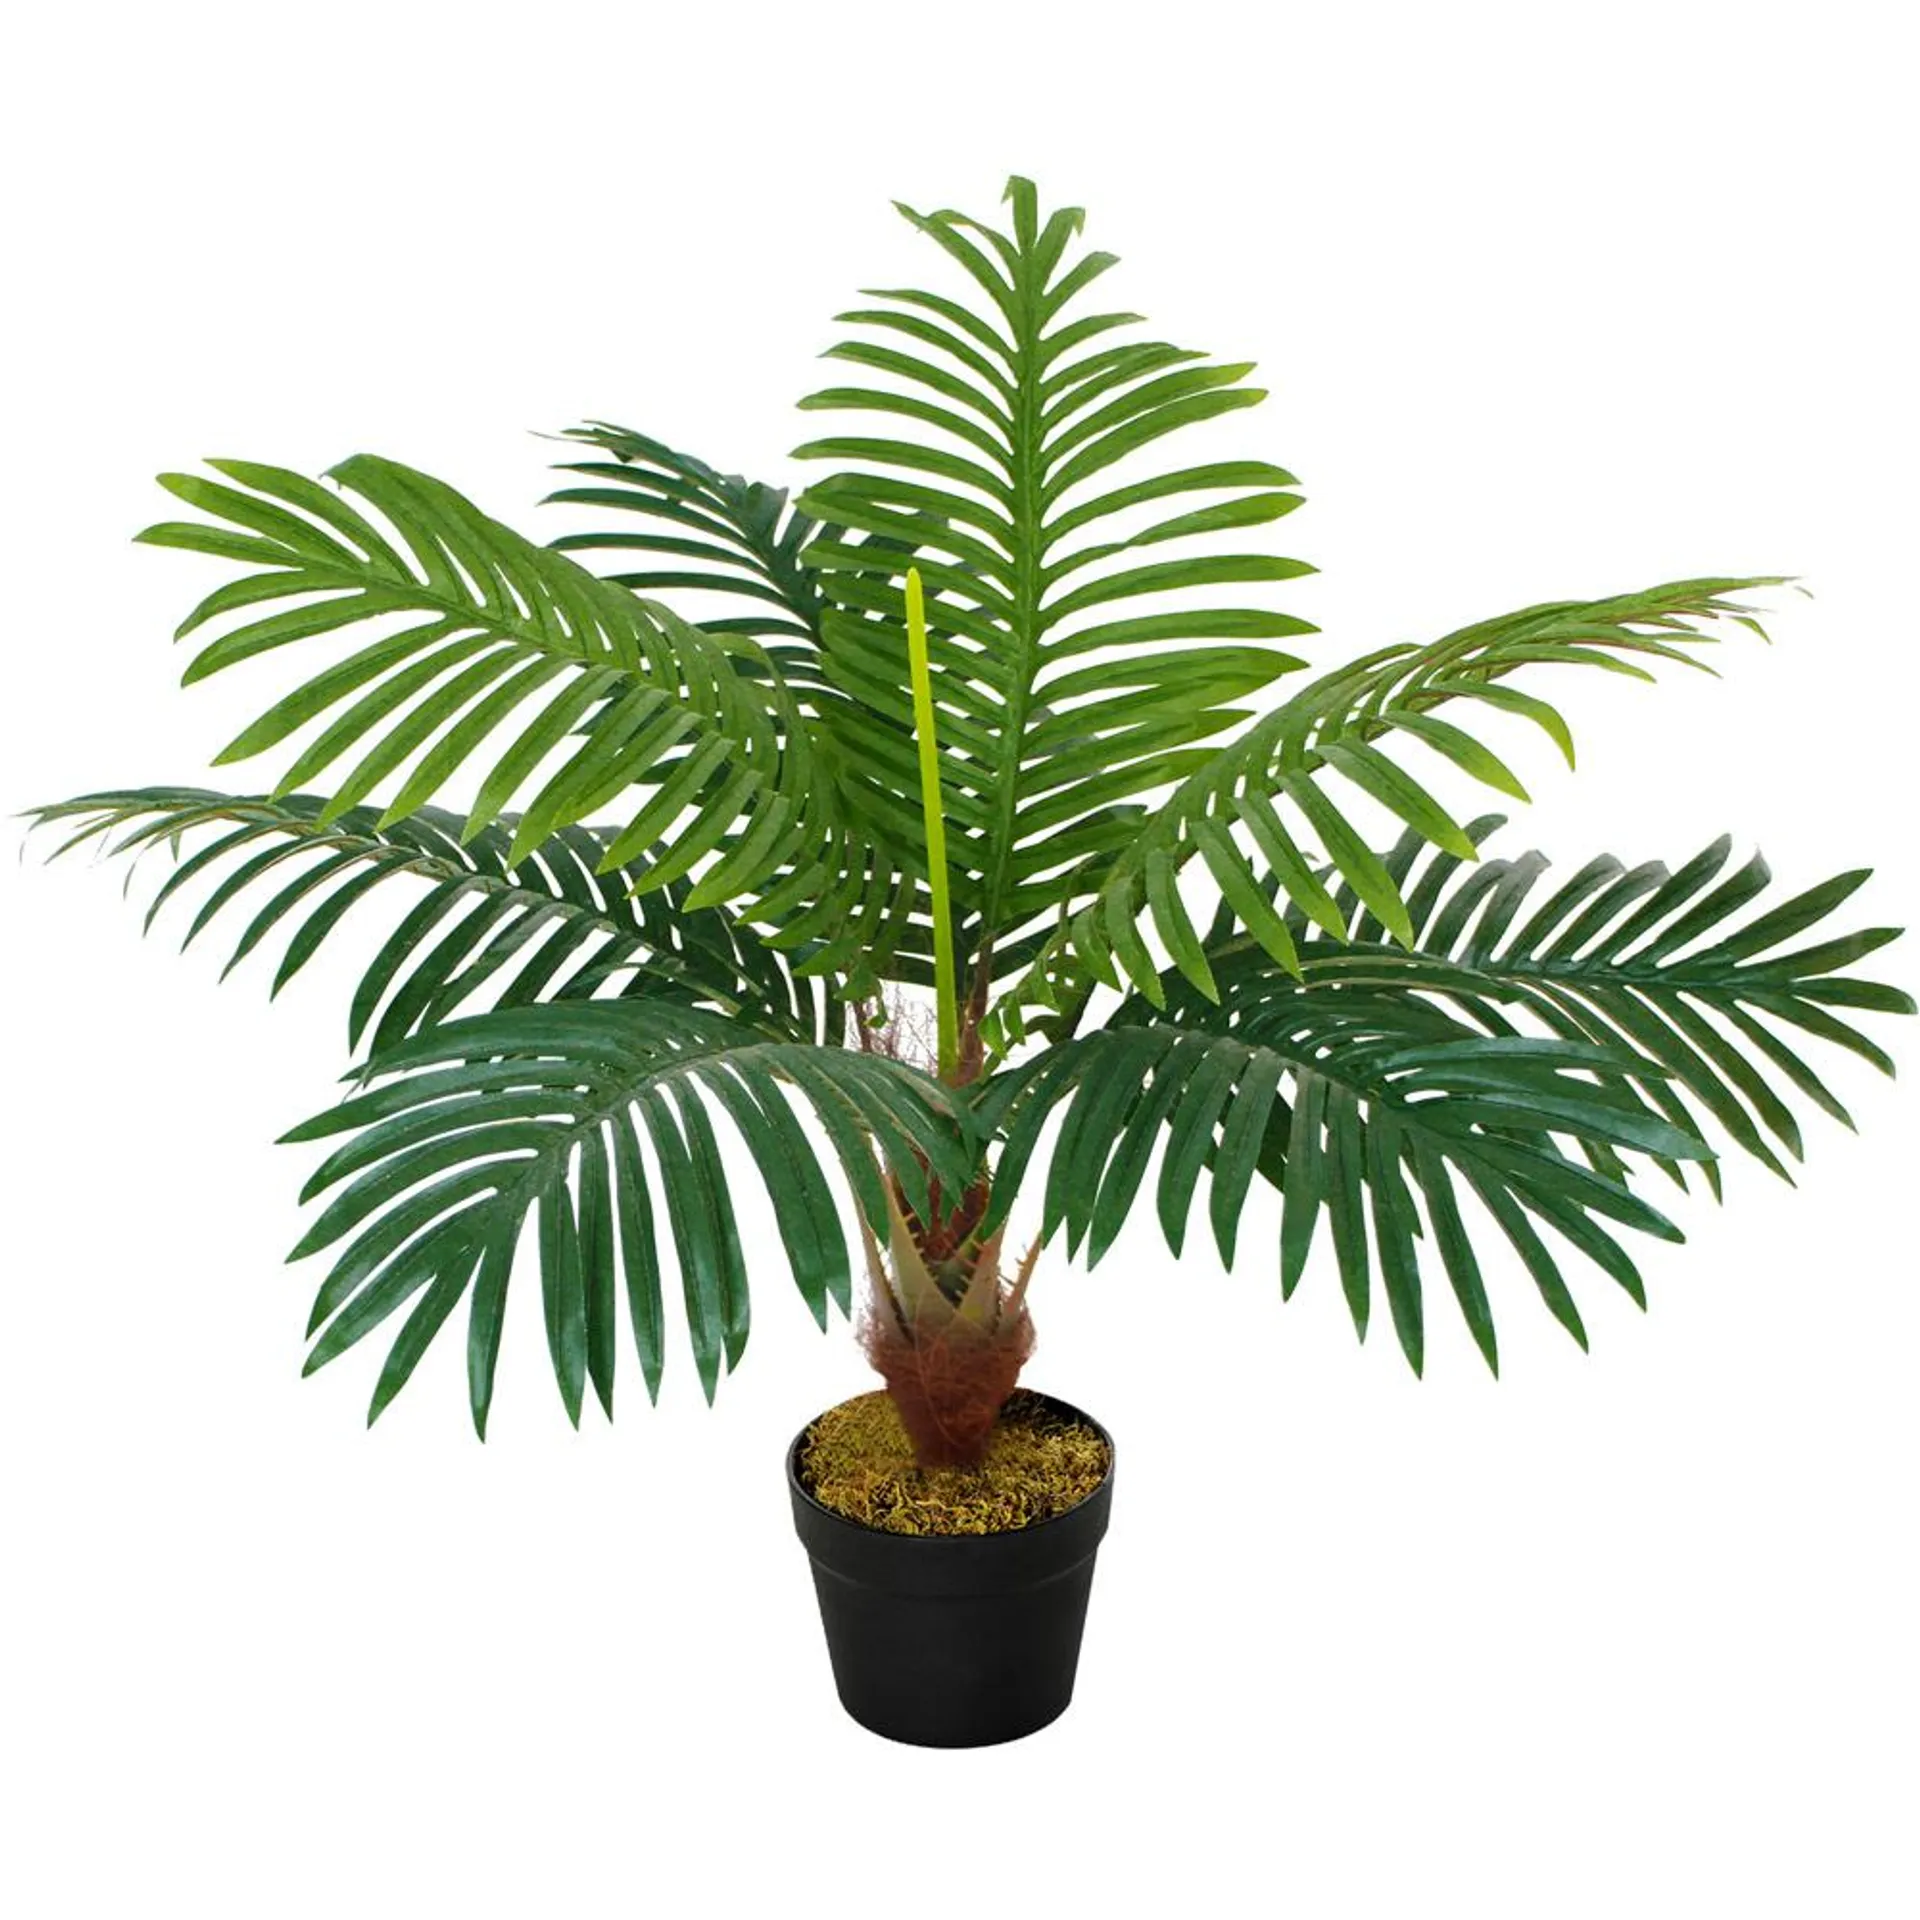 Outsunny Tropical Palm Tree Artificial Plant In Pot 2ft